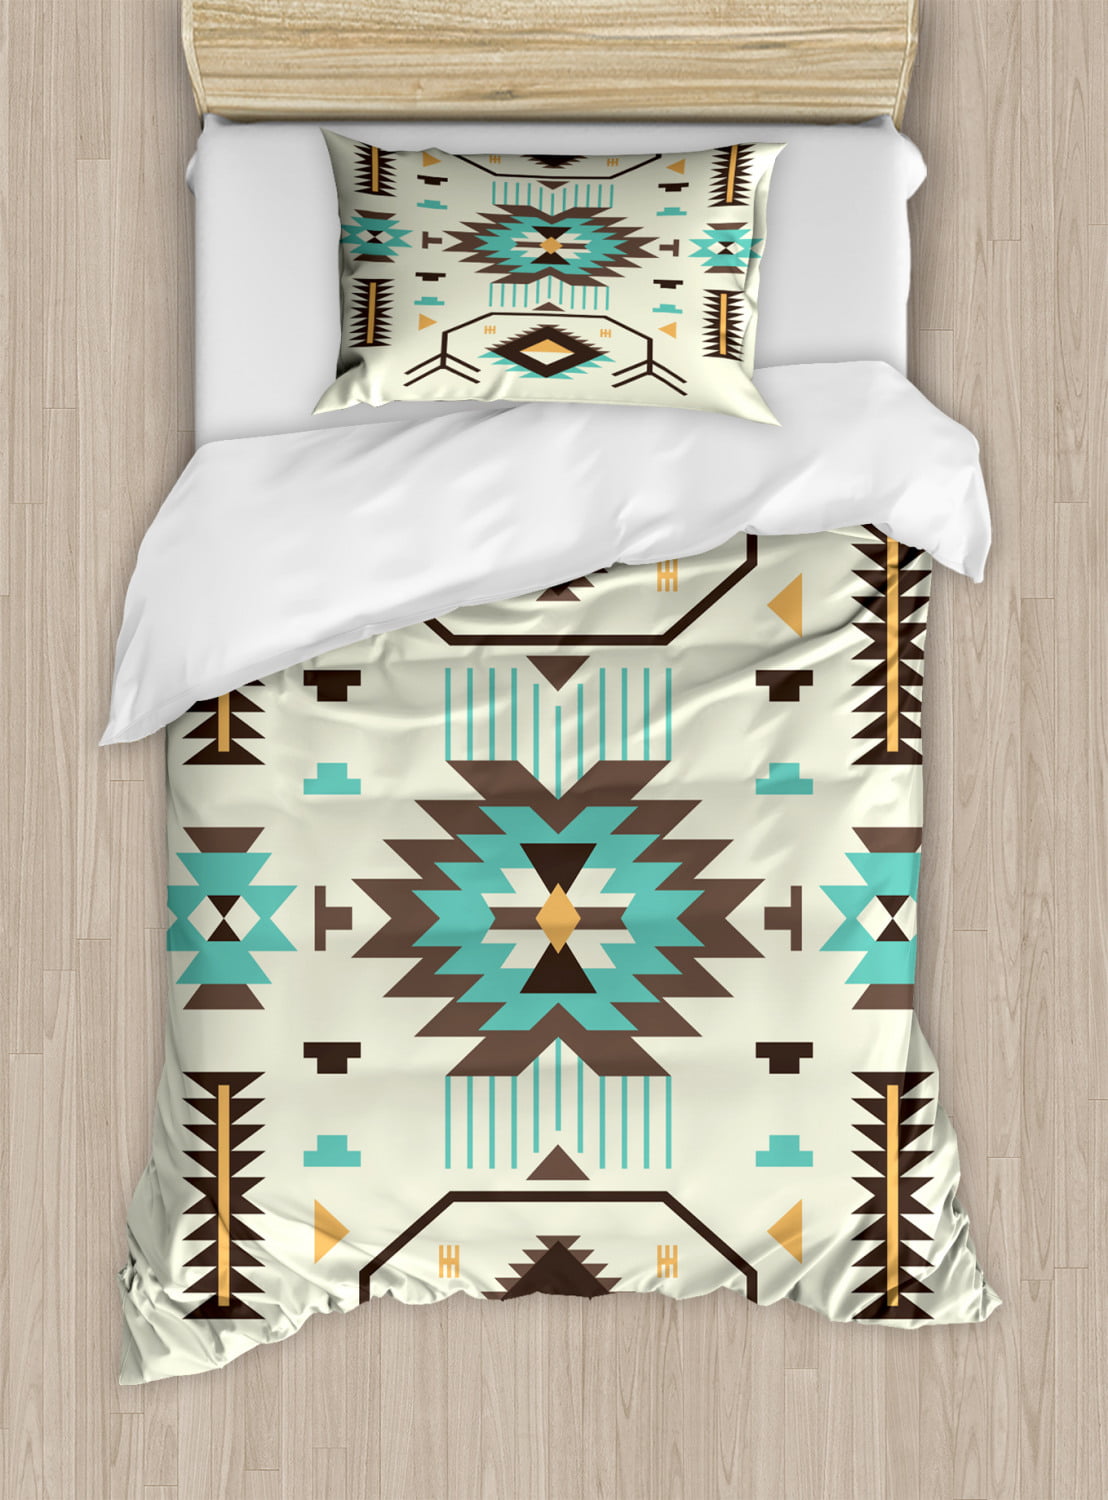 Opalhouse Washed Tribal Aztec Border Teal Duvet Cover Set 2 pc   TWIN/TWIN XL 